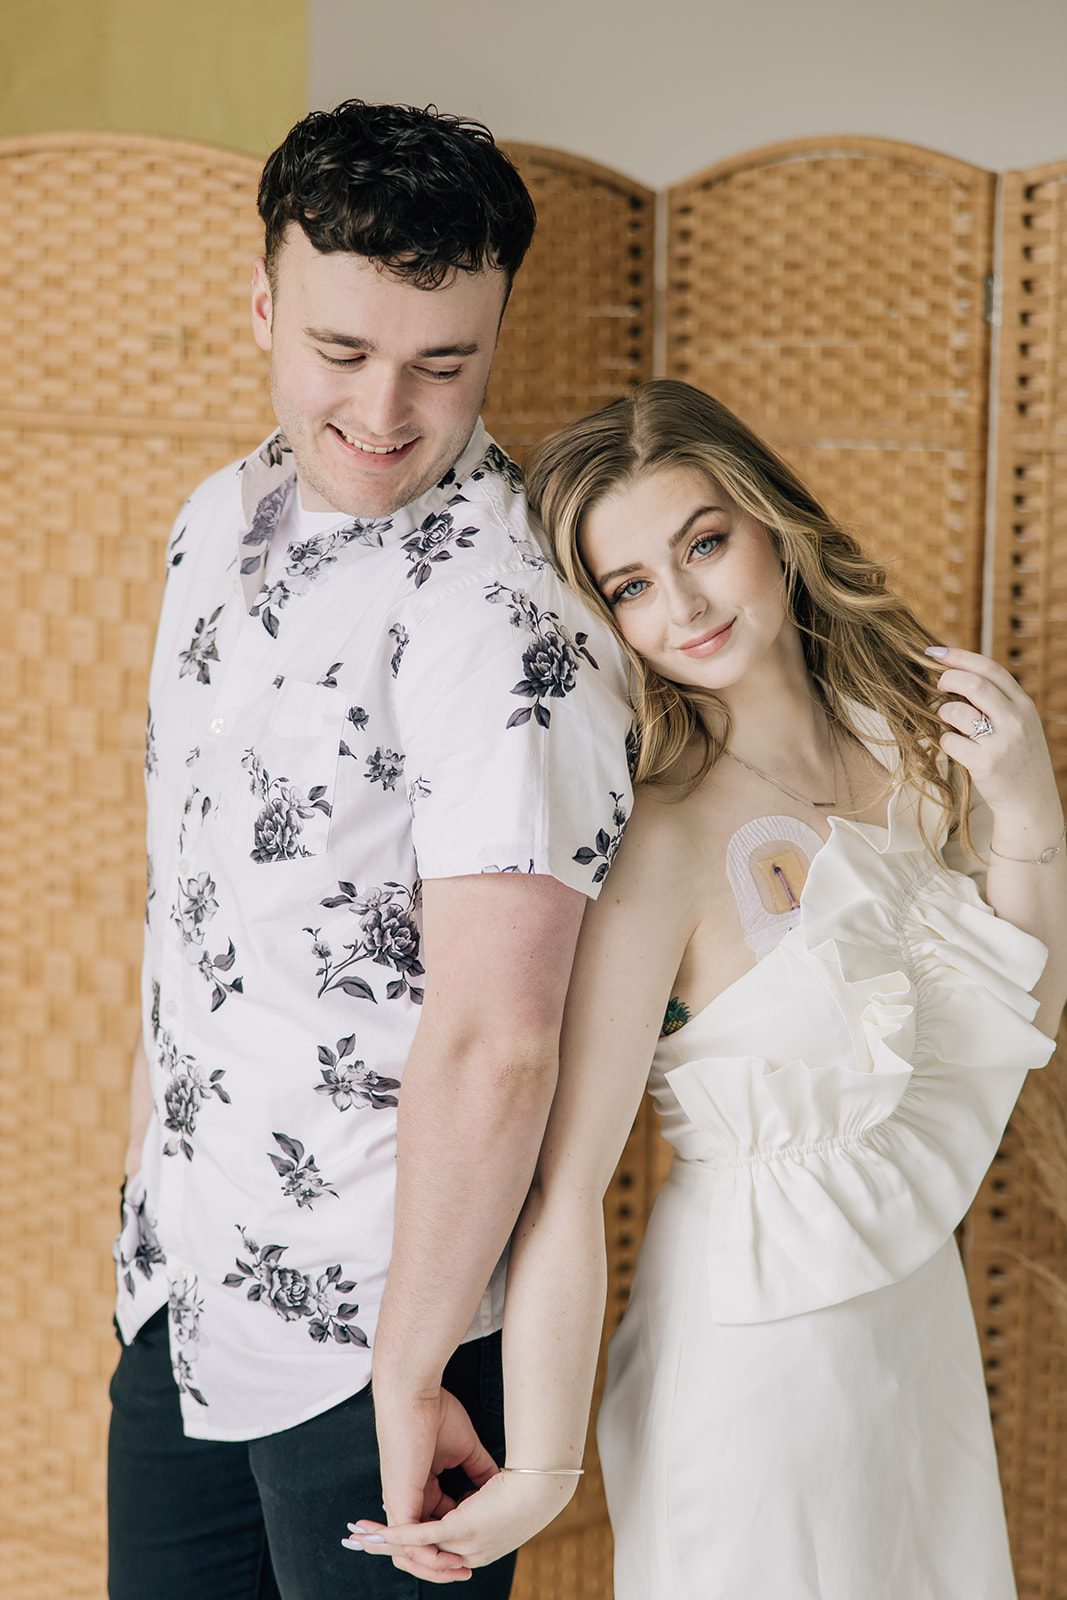 Capture Your Special Moment at the Great Saltair in Utah | Brady + Makenna